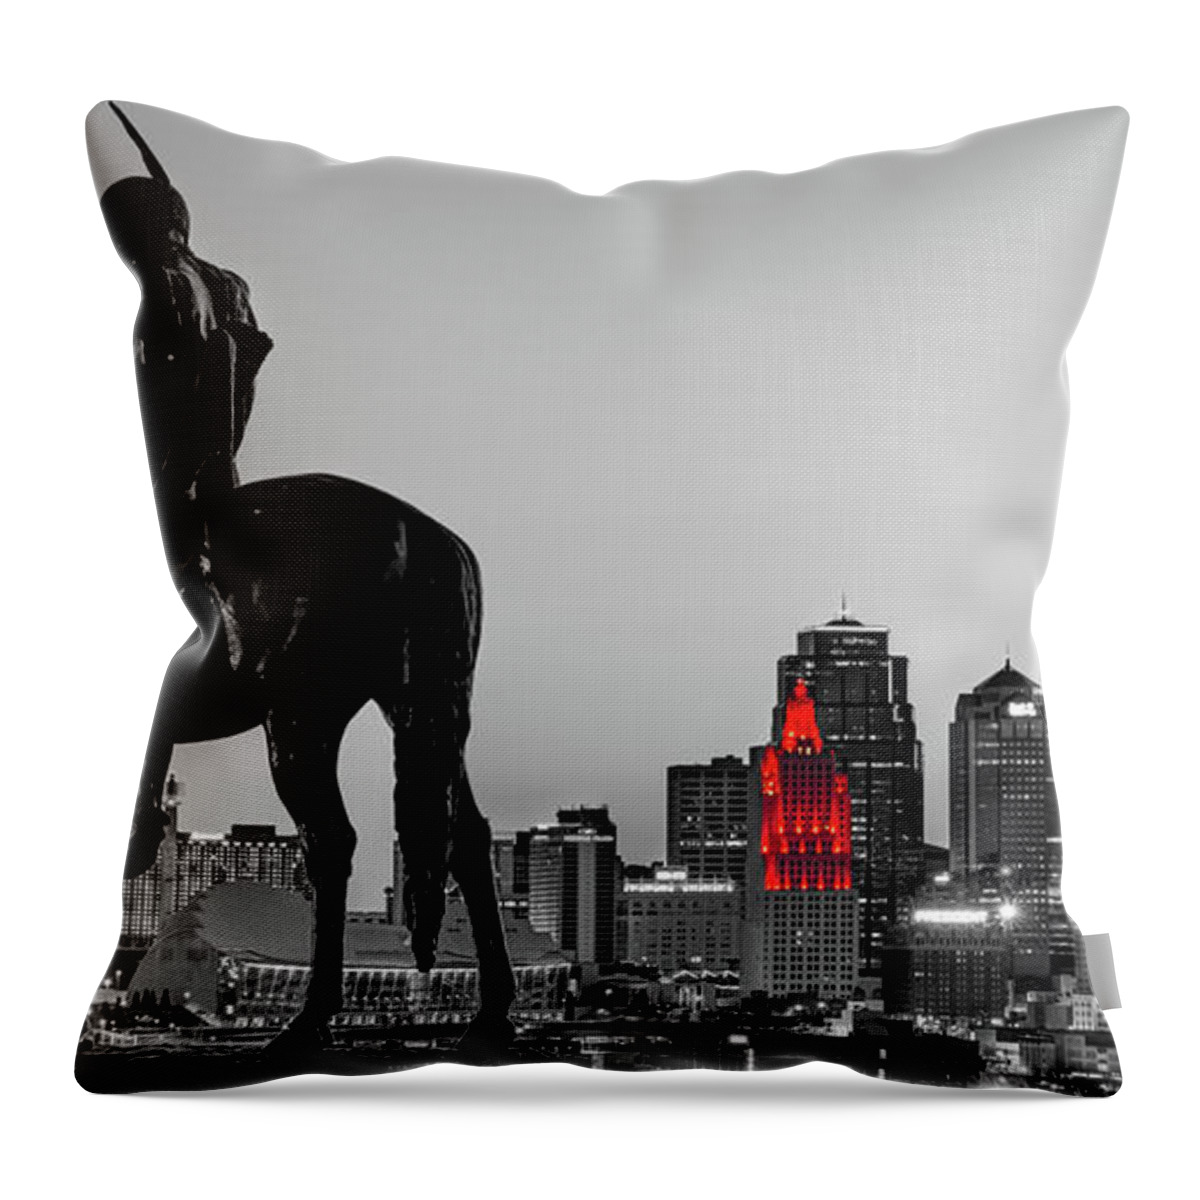 Kansas City Scout Throw Pillow featuring the photograph The Kansas City Scout Overlooking The Downtown Cityscape - Selective Color Panorama by Gregory Ballos